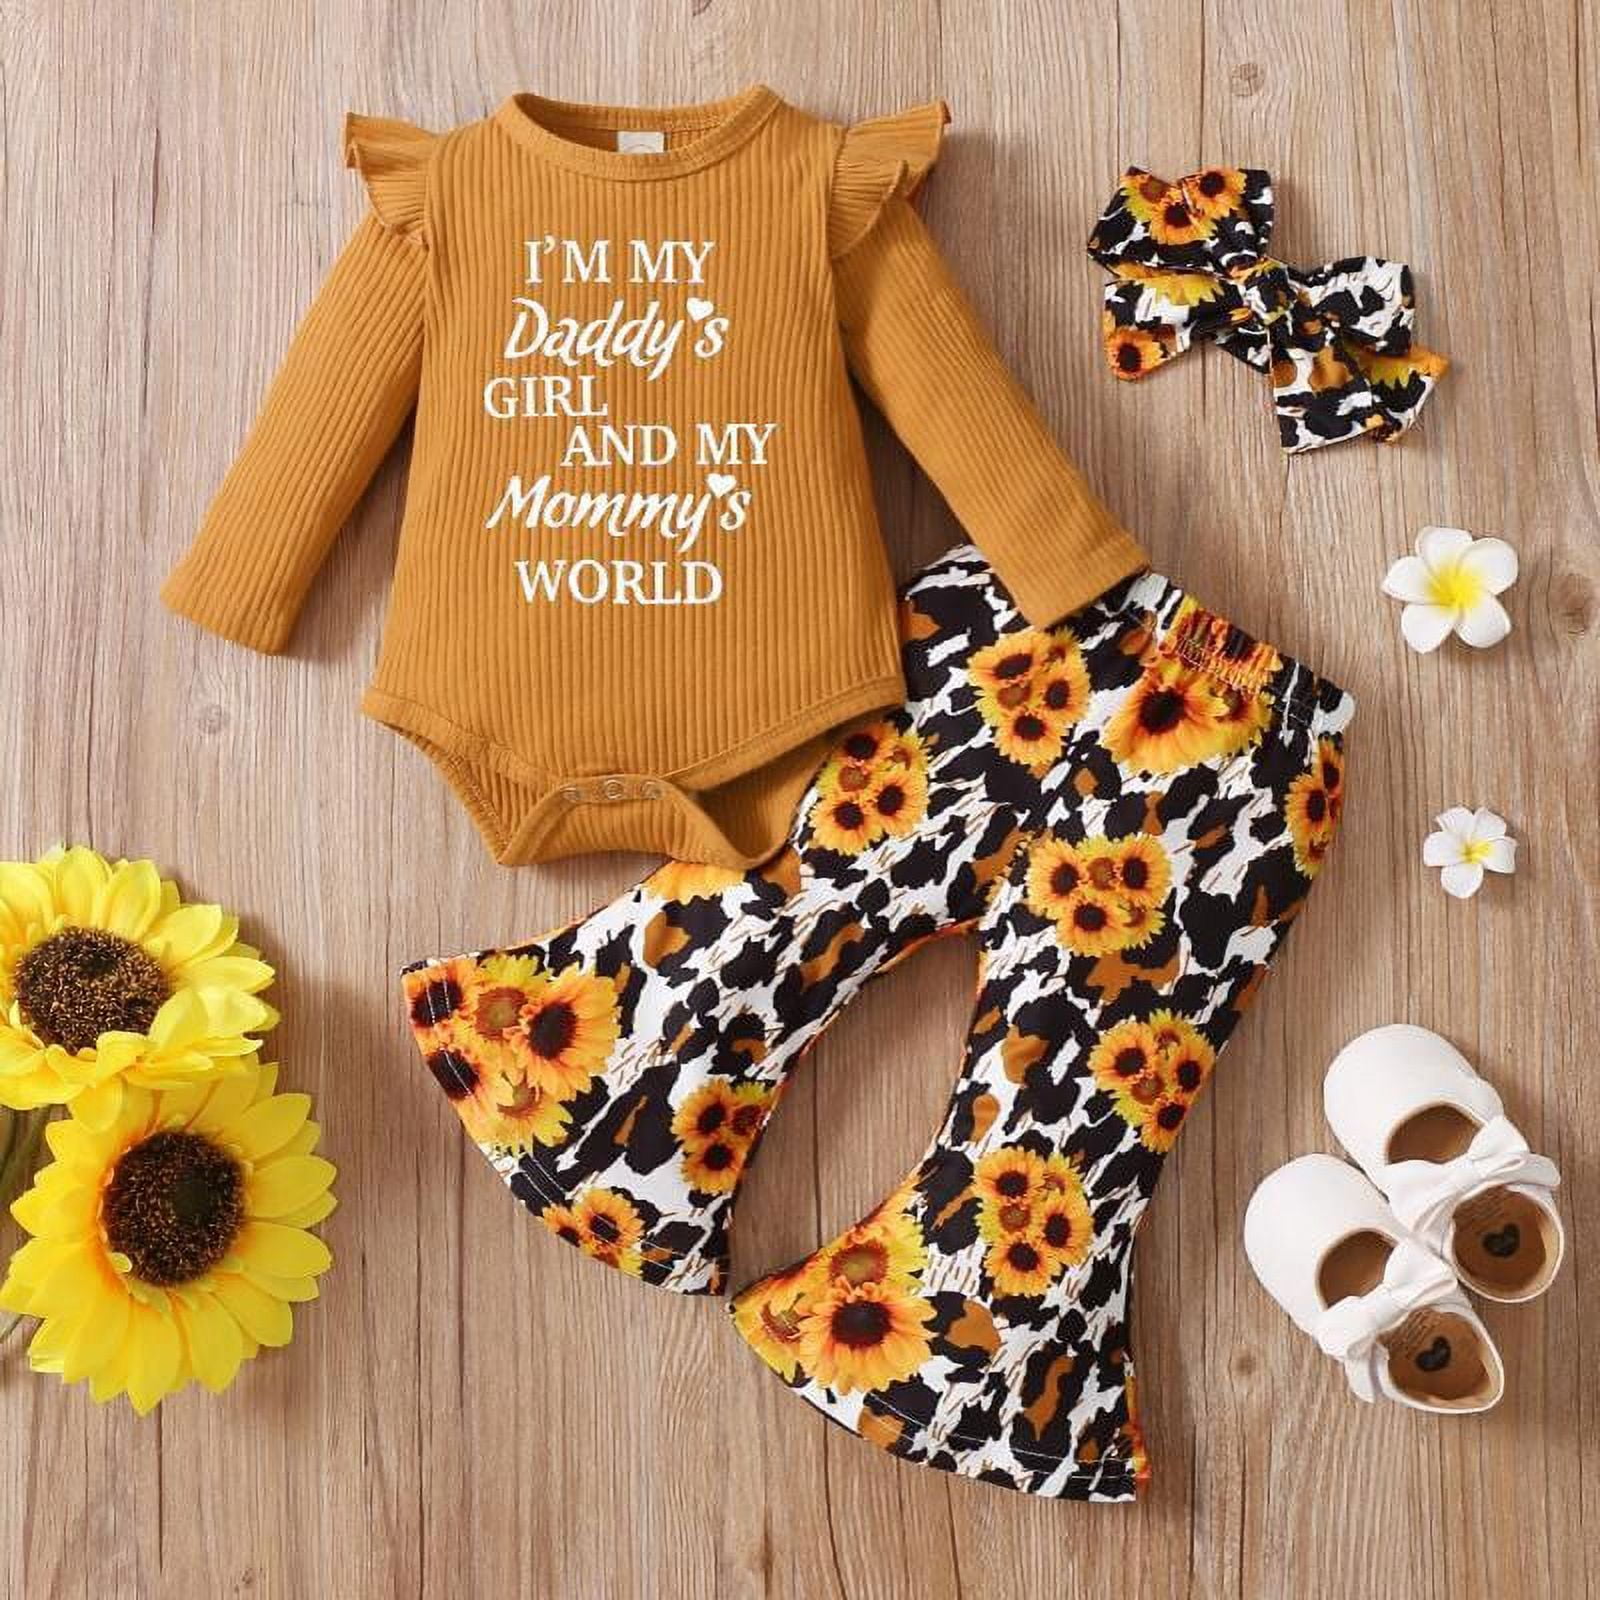 3pcs Baby Girl Clothes Infant Cotton Outfits - Avocado/sunflower